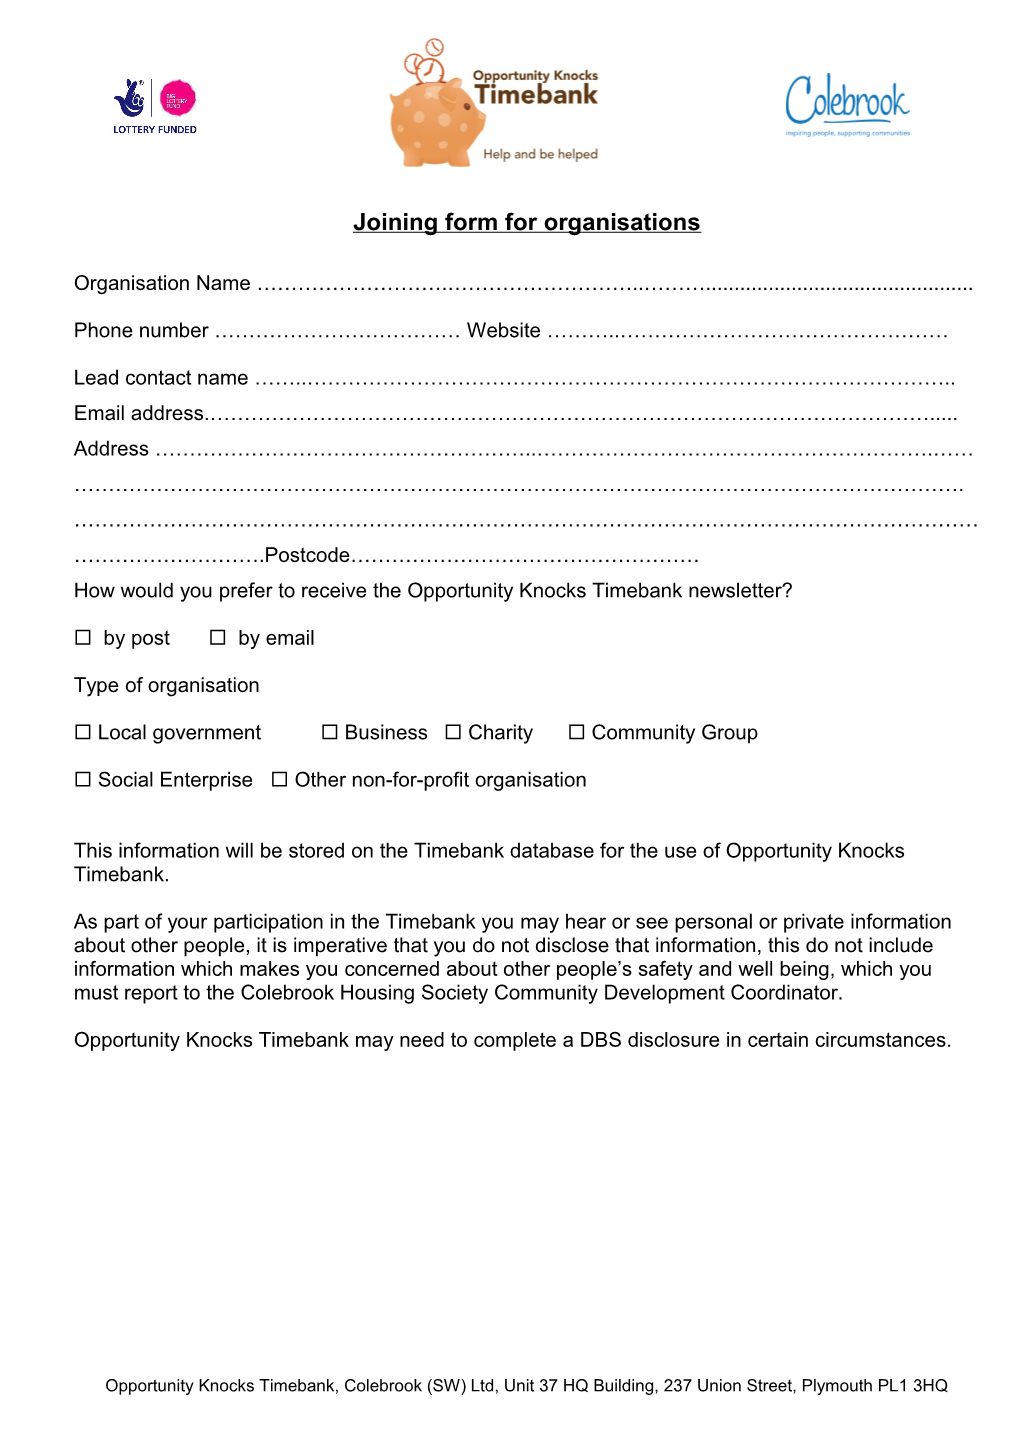 Joining Form for Organisations